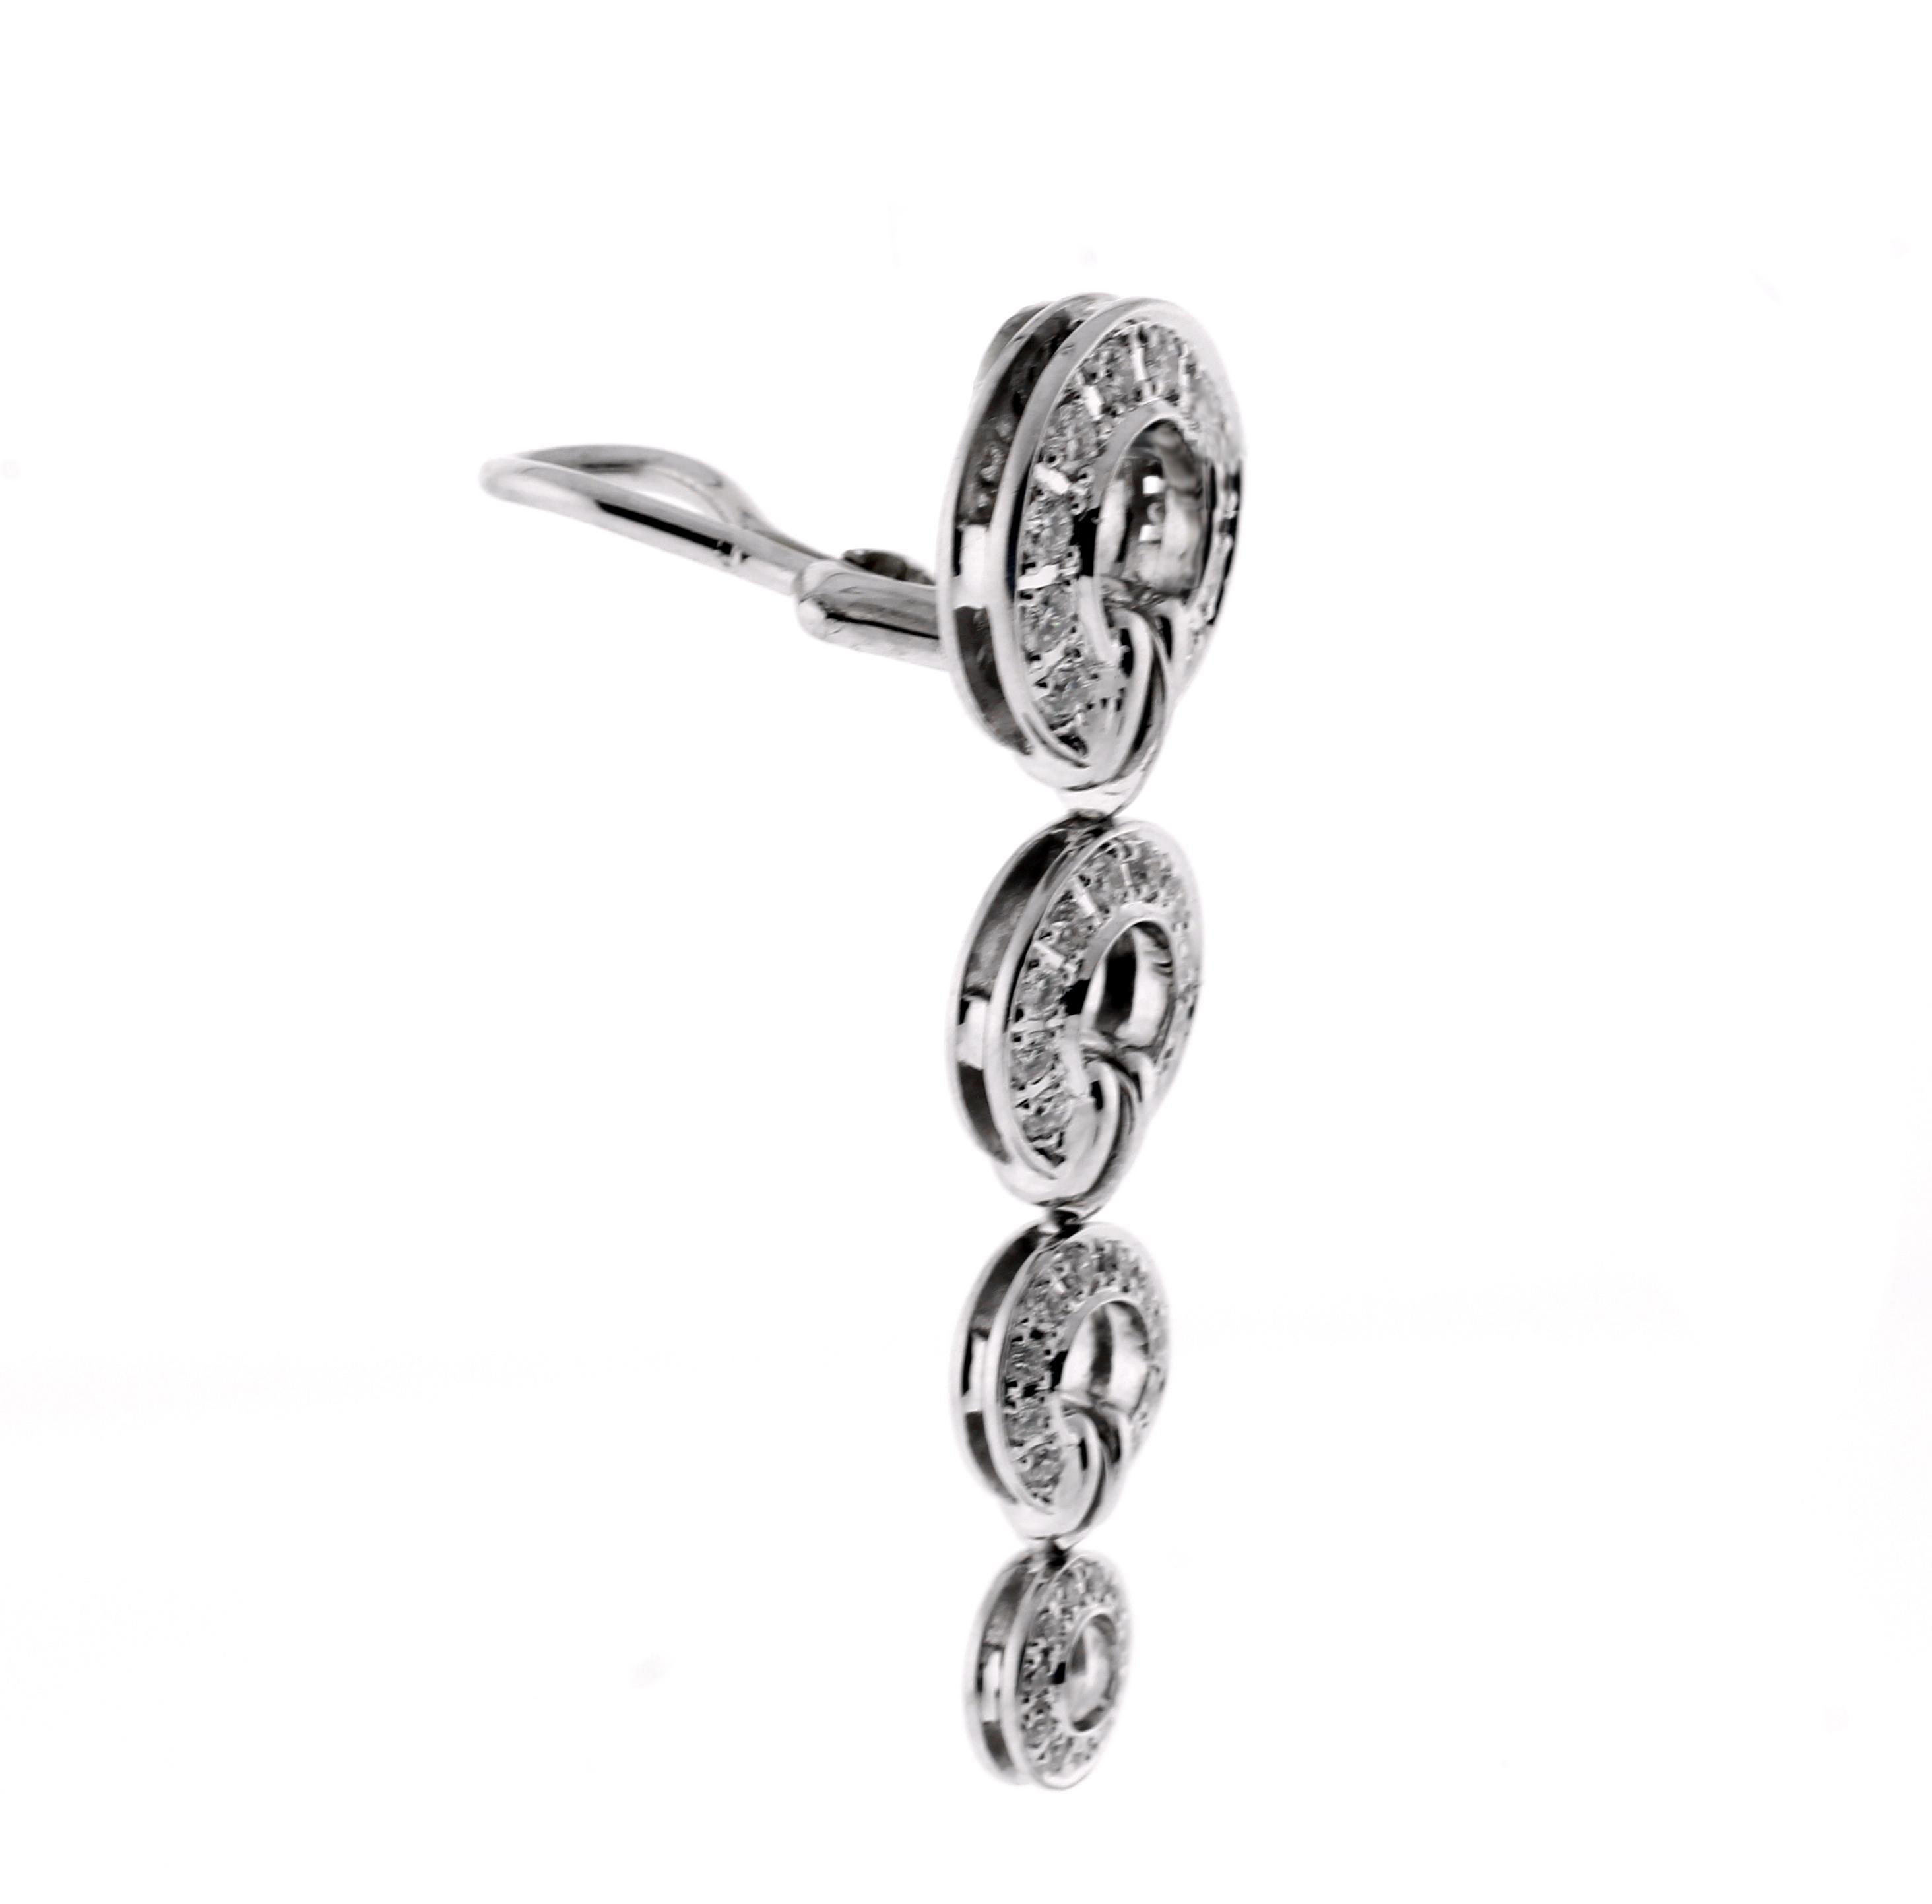 From Di Modolo’s Tempia collection, a pair of diamond circle drop earrings.
Designer: Di Modolo
• Metal: 18 karat white gold
• Circa:  late 20th century
• Size: 1 ½ inches long, half inch wide
• Diamond: 88 diamonds 1.44carats
• Packaging: